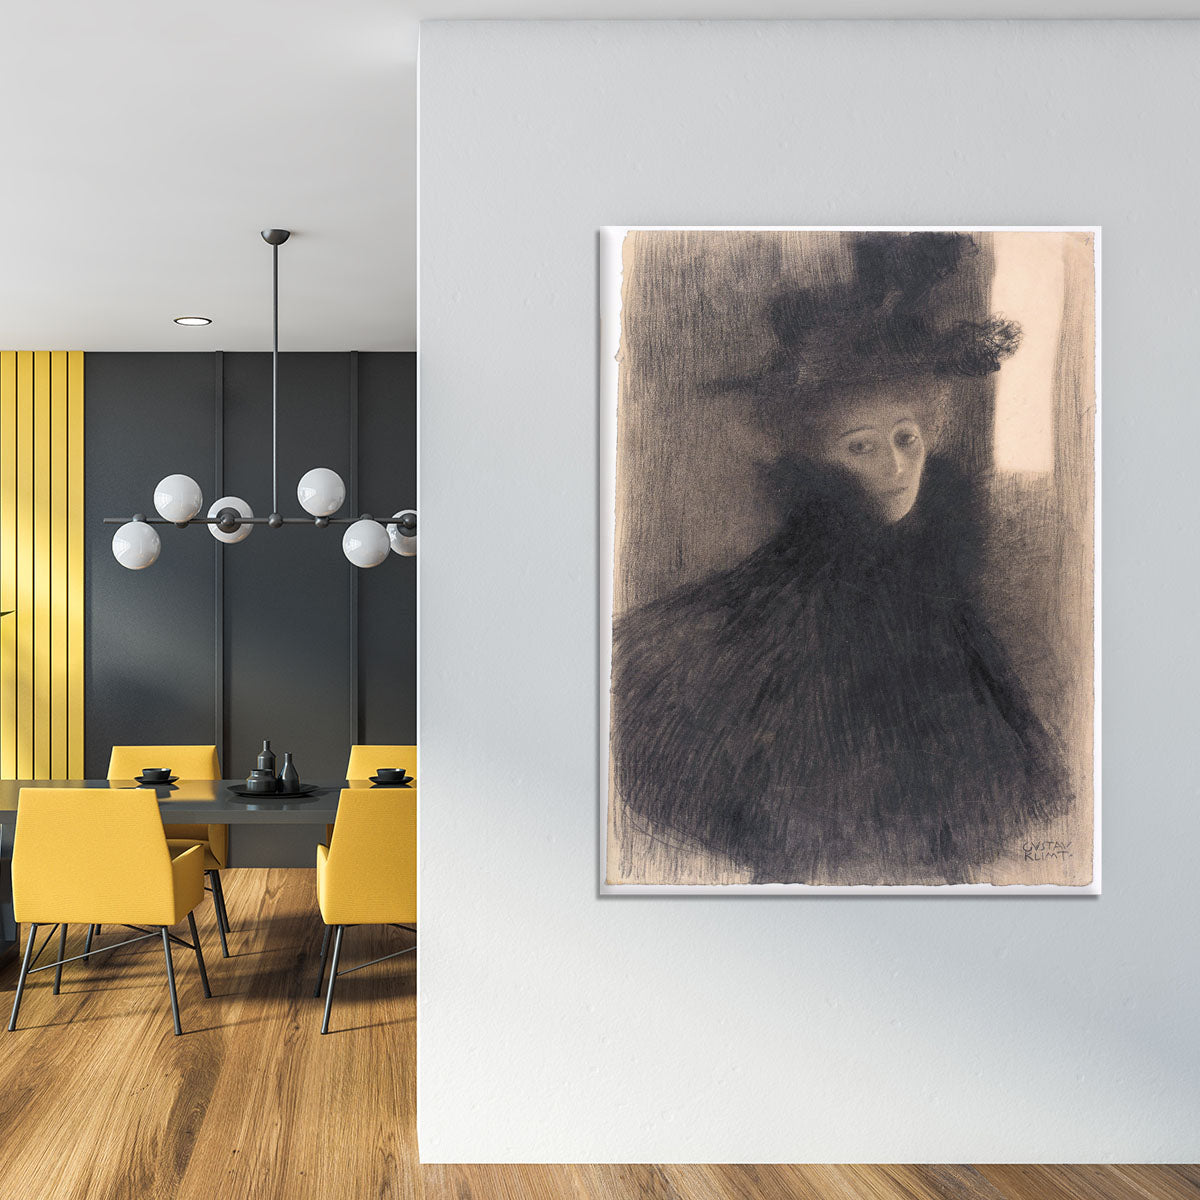 Portrait of a Lady with Cape and Hat by Klimt Canvas Print or Poster - Canvas Art Rocks - 4